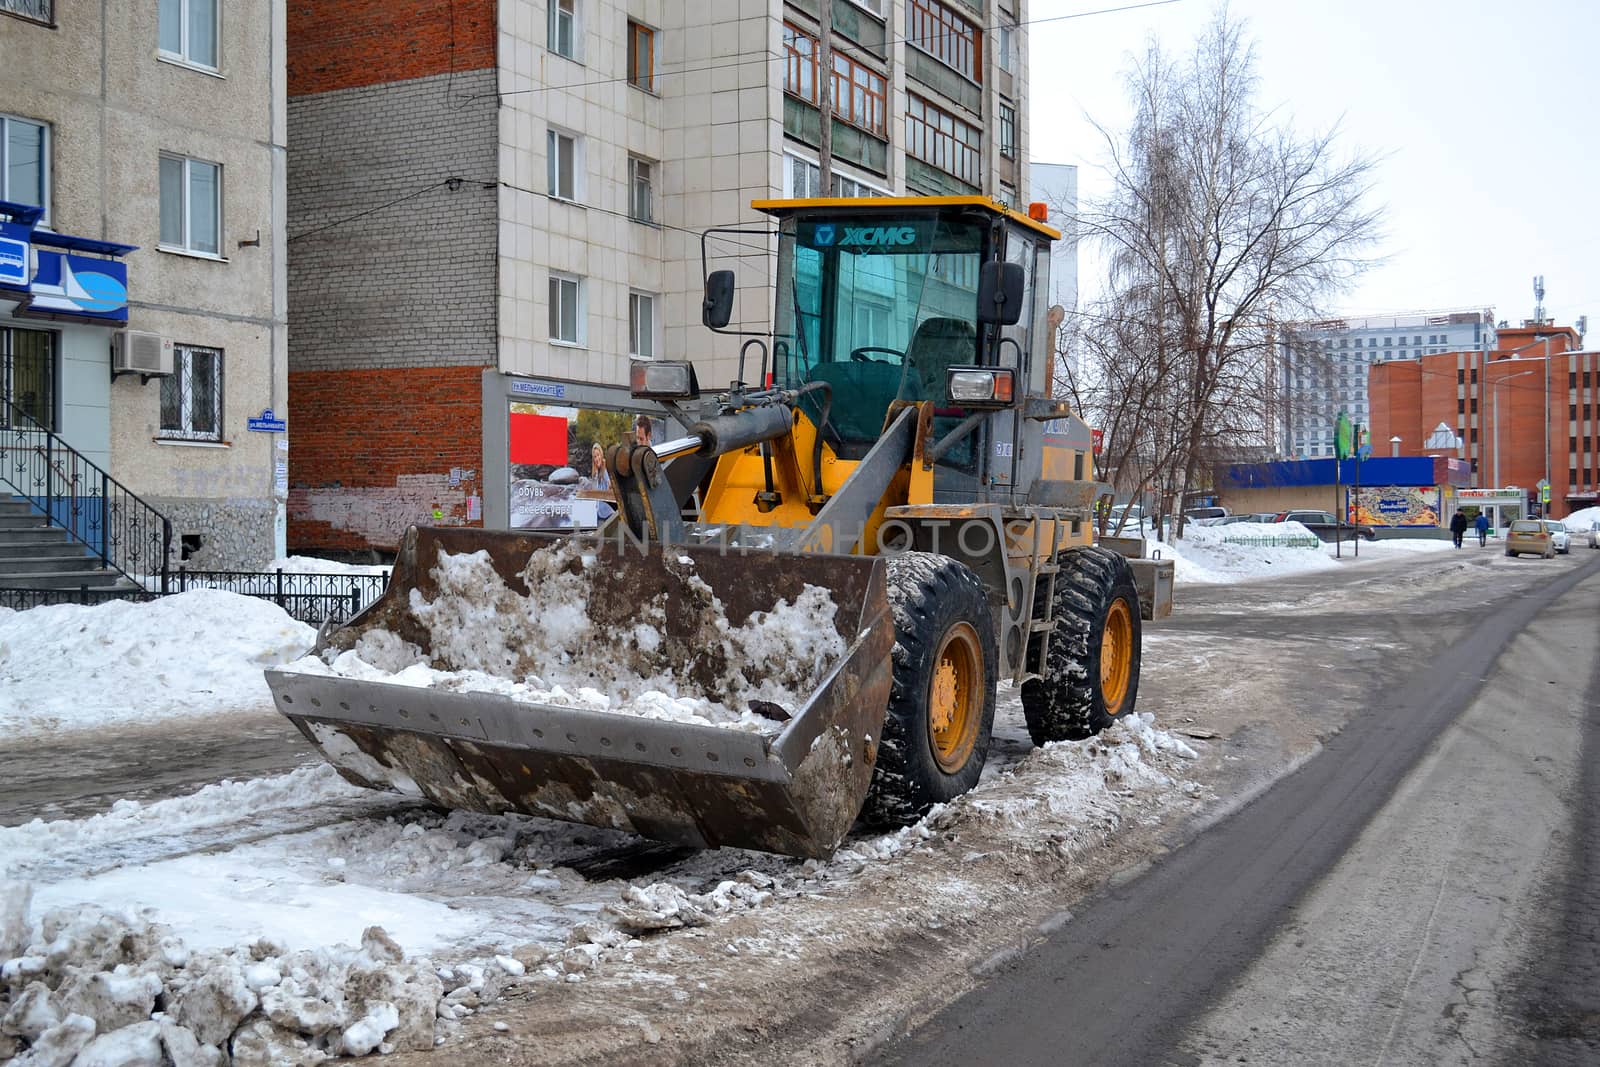 Cleaning of snow from city streets. by veronka72